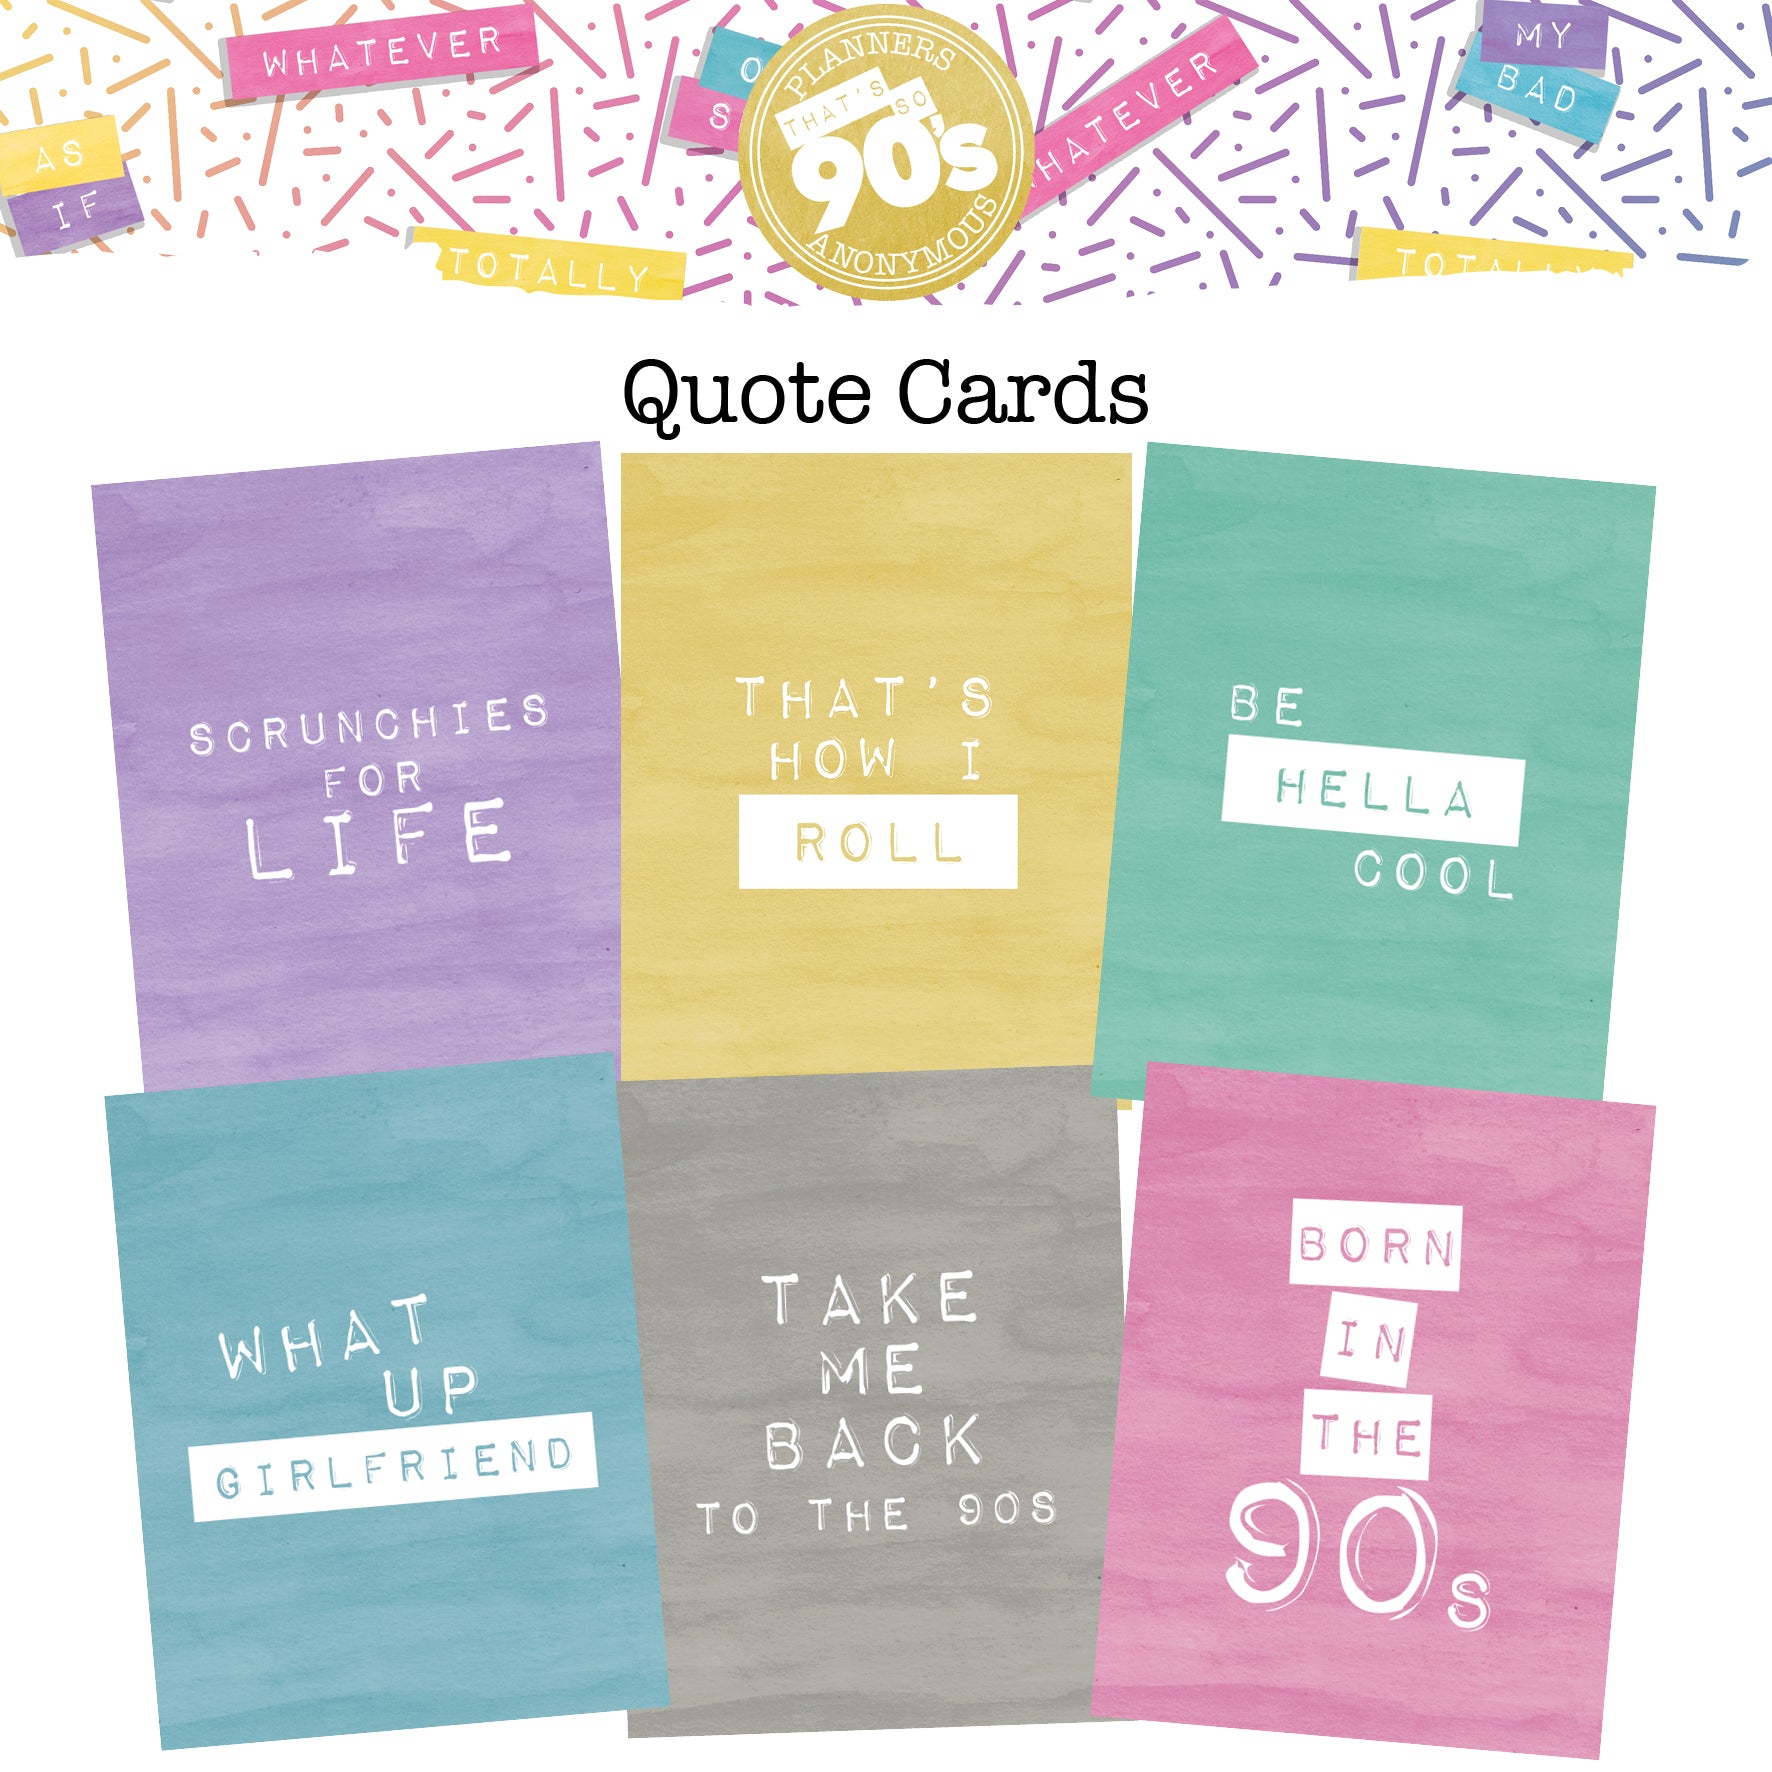 That's So 90s Quote Cards